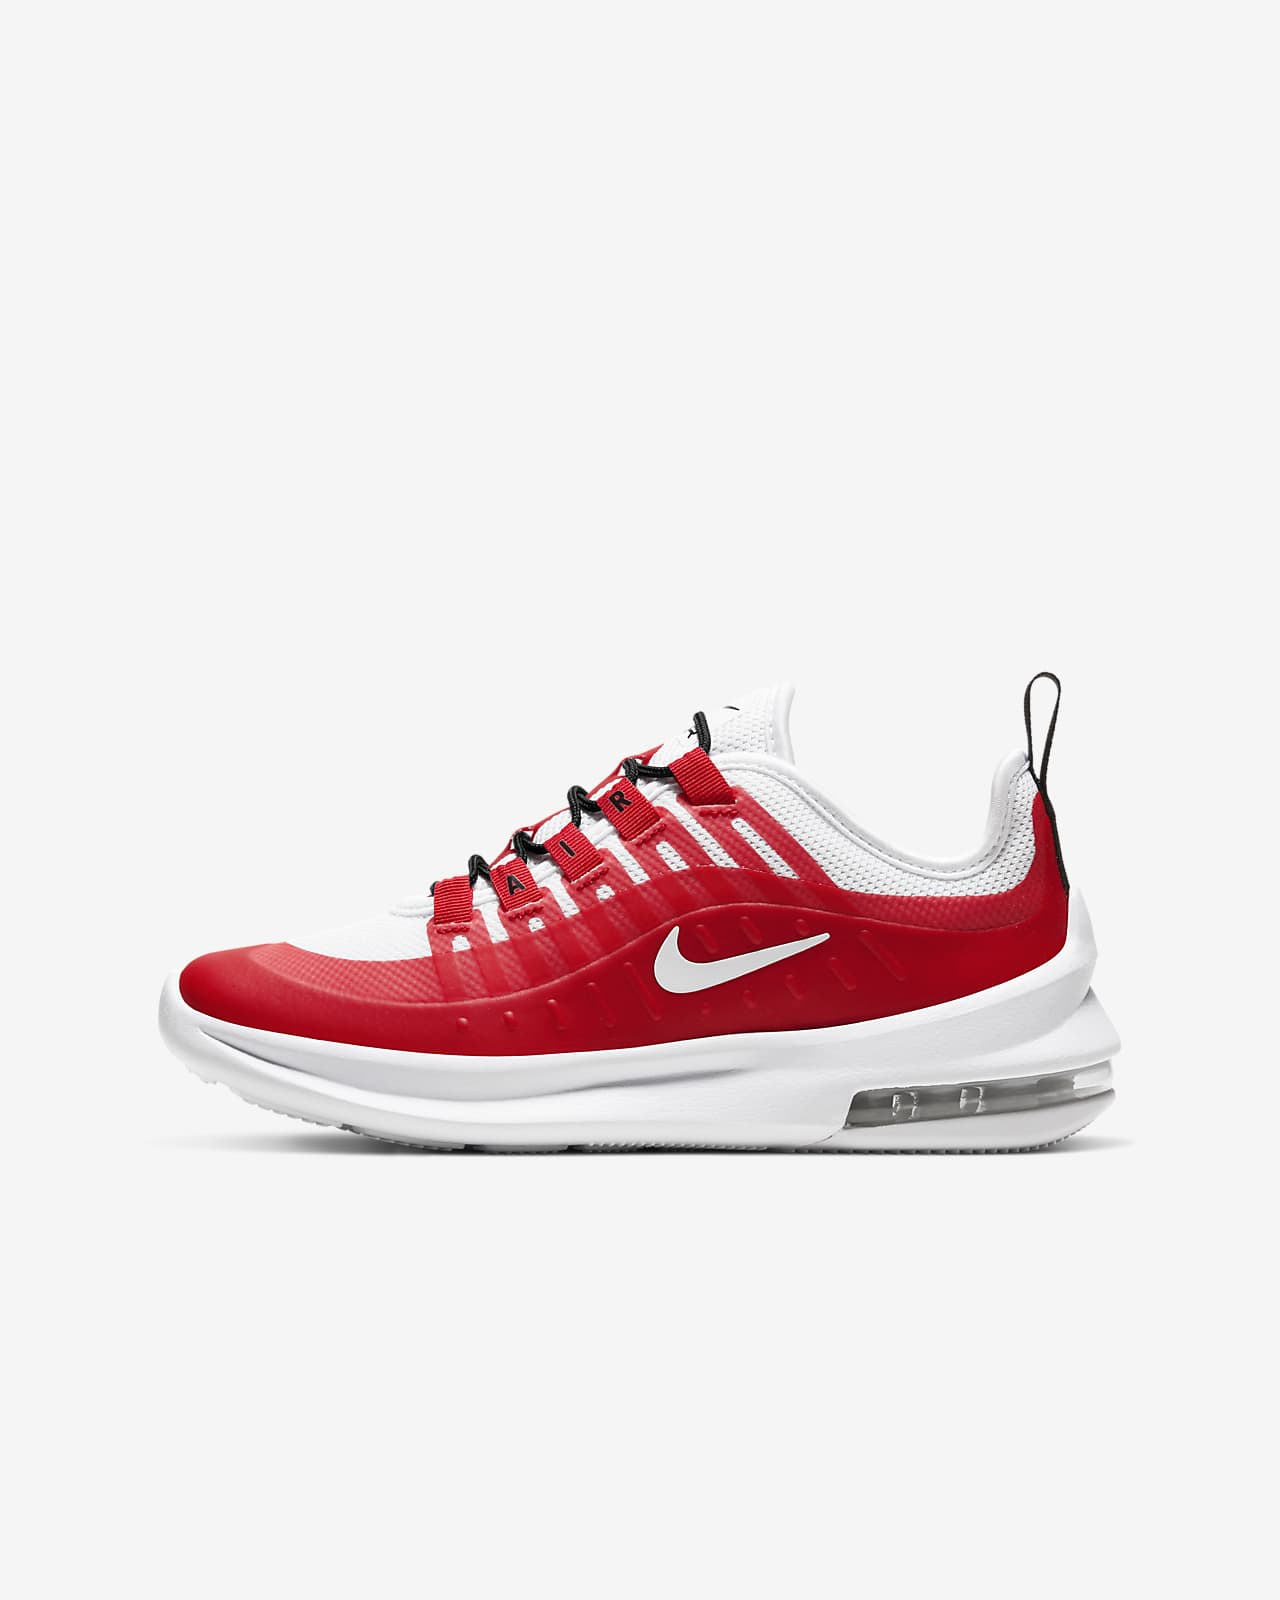 matica Norma Neaktivan air max axis red 